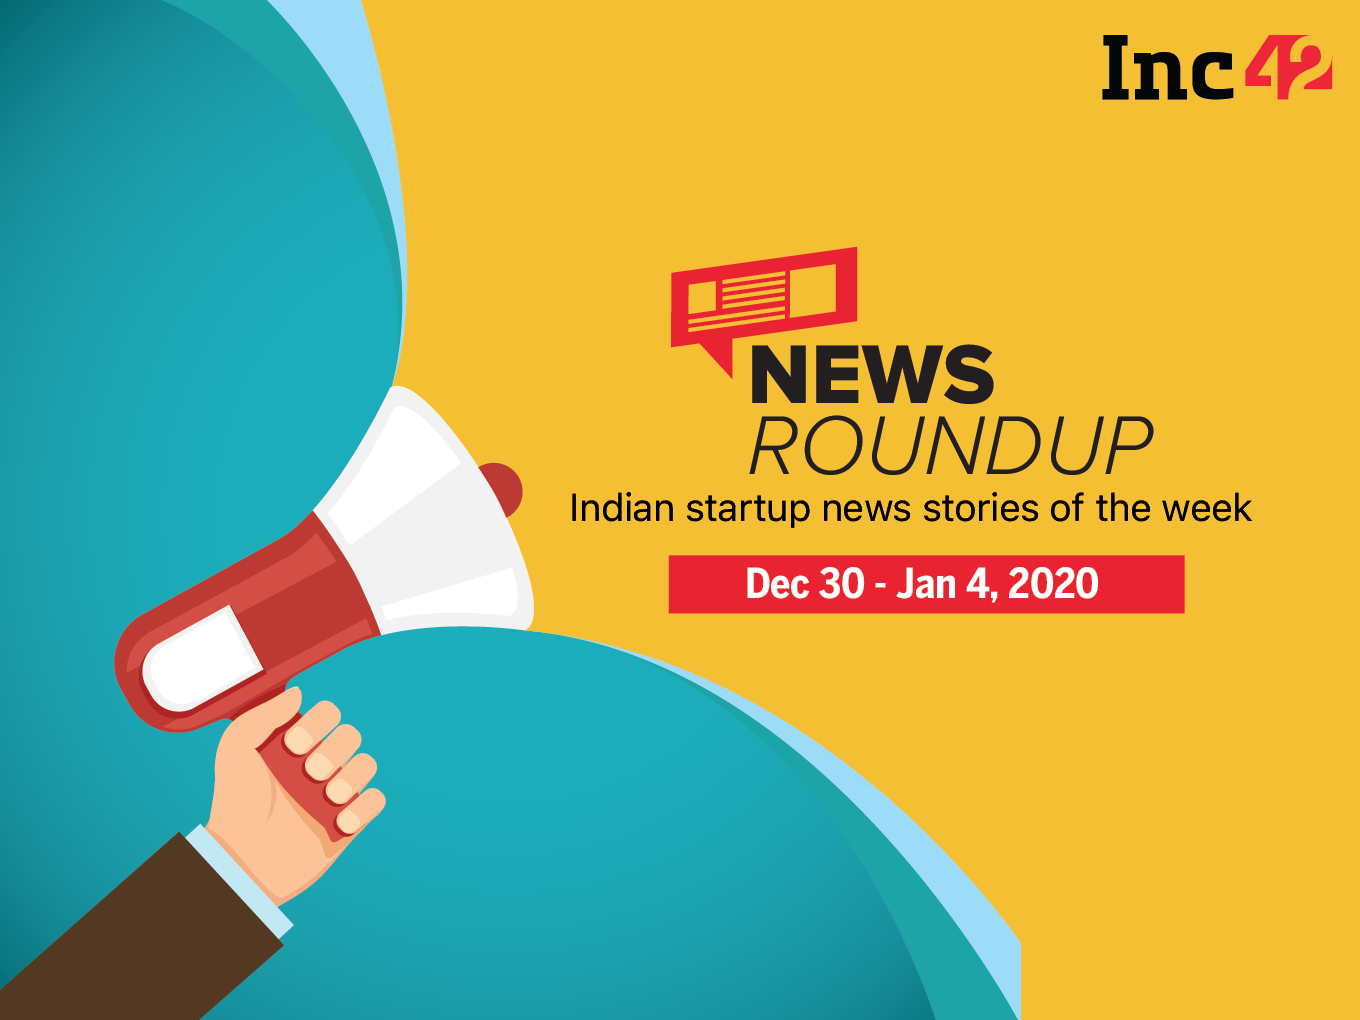 News Roundup: 11 Indian Startup News Stories You Don’t Want To Miss This Week [Dec 30 - Jan 4]